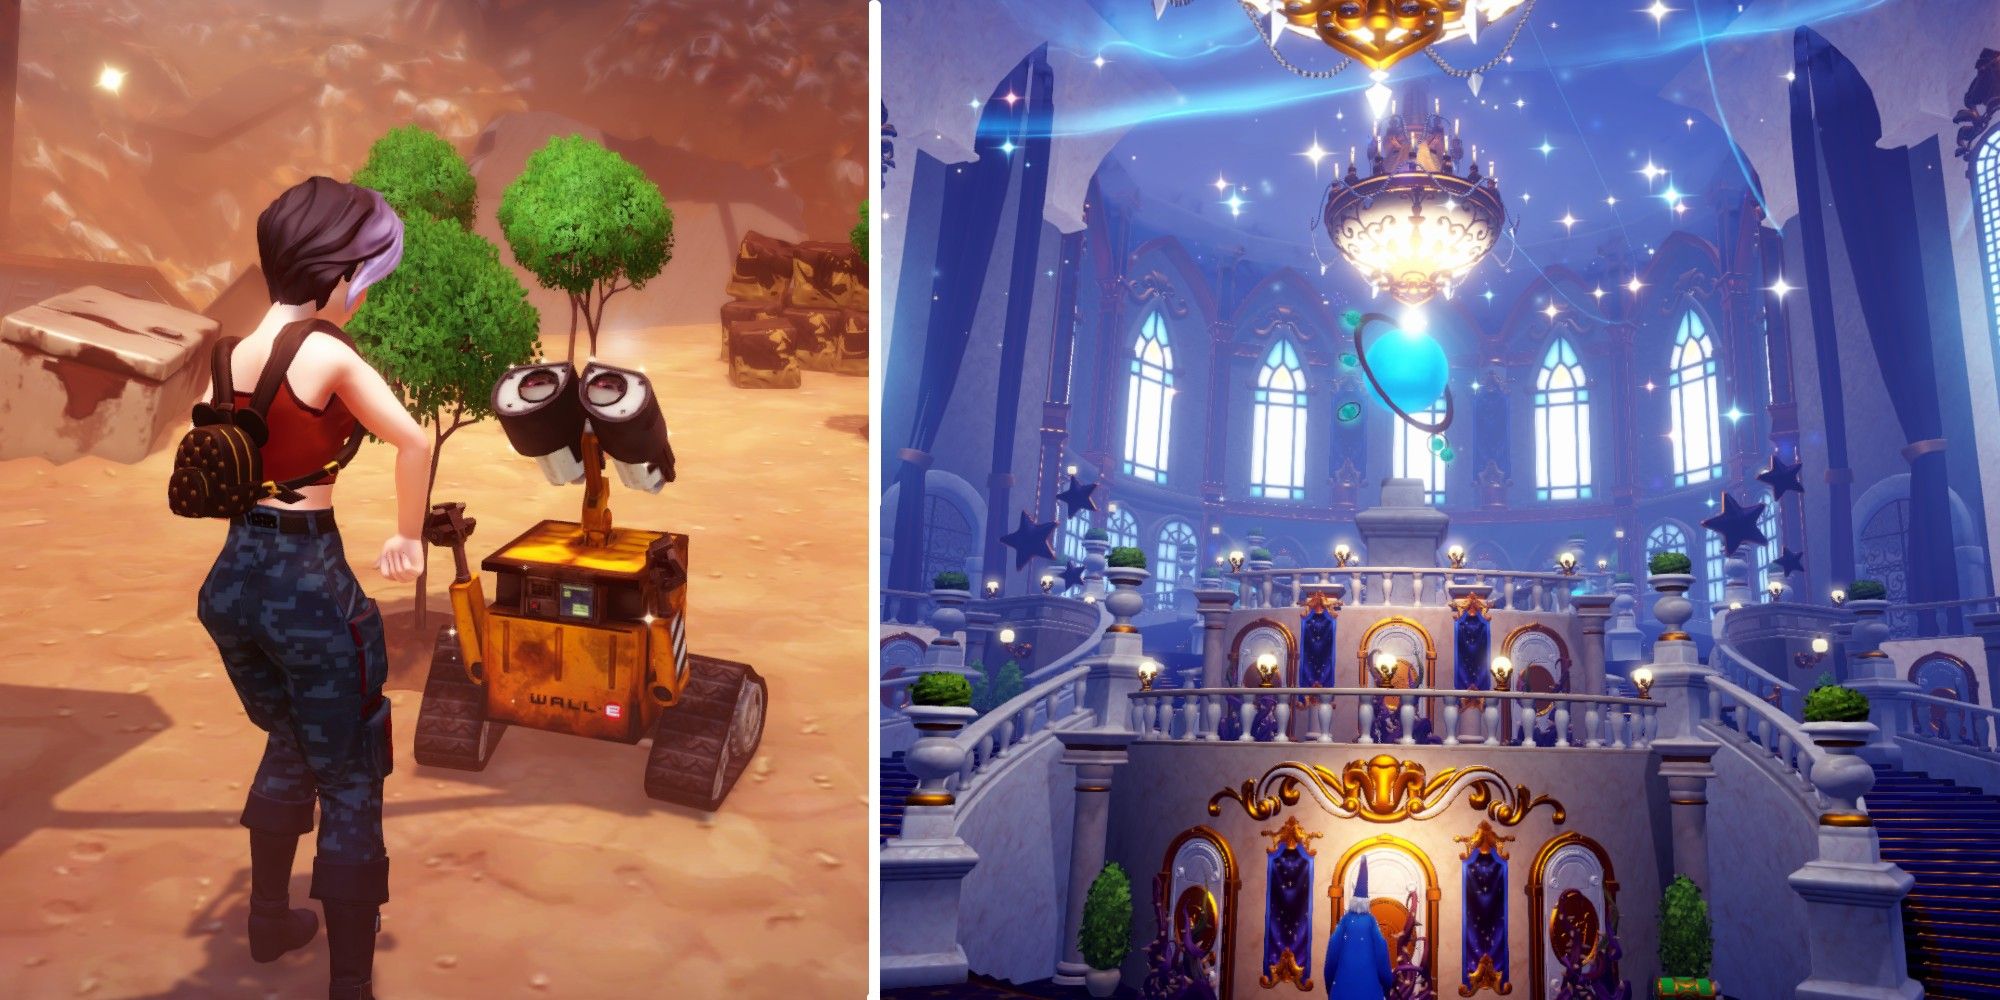 Wall-E and the enchanted castle from Dreamlight Valley